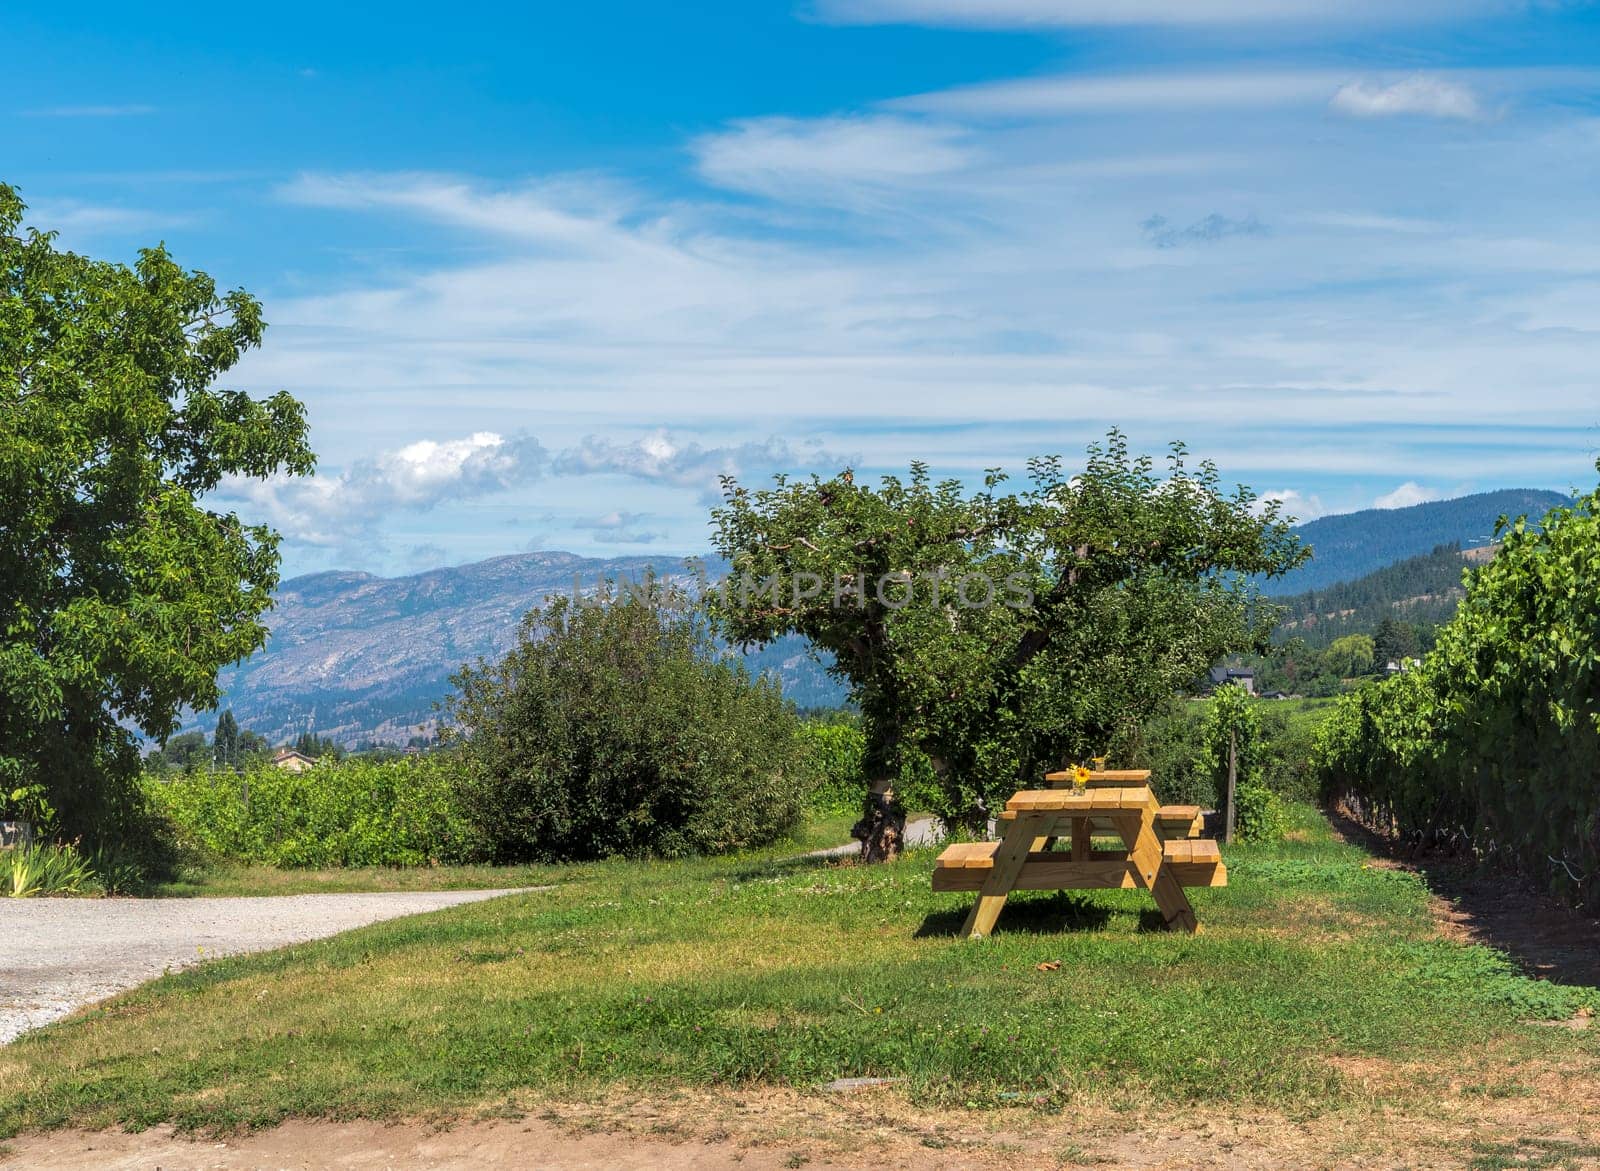 Wooden table and benches in recreation area with beautiful overview of mountains.